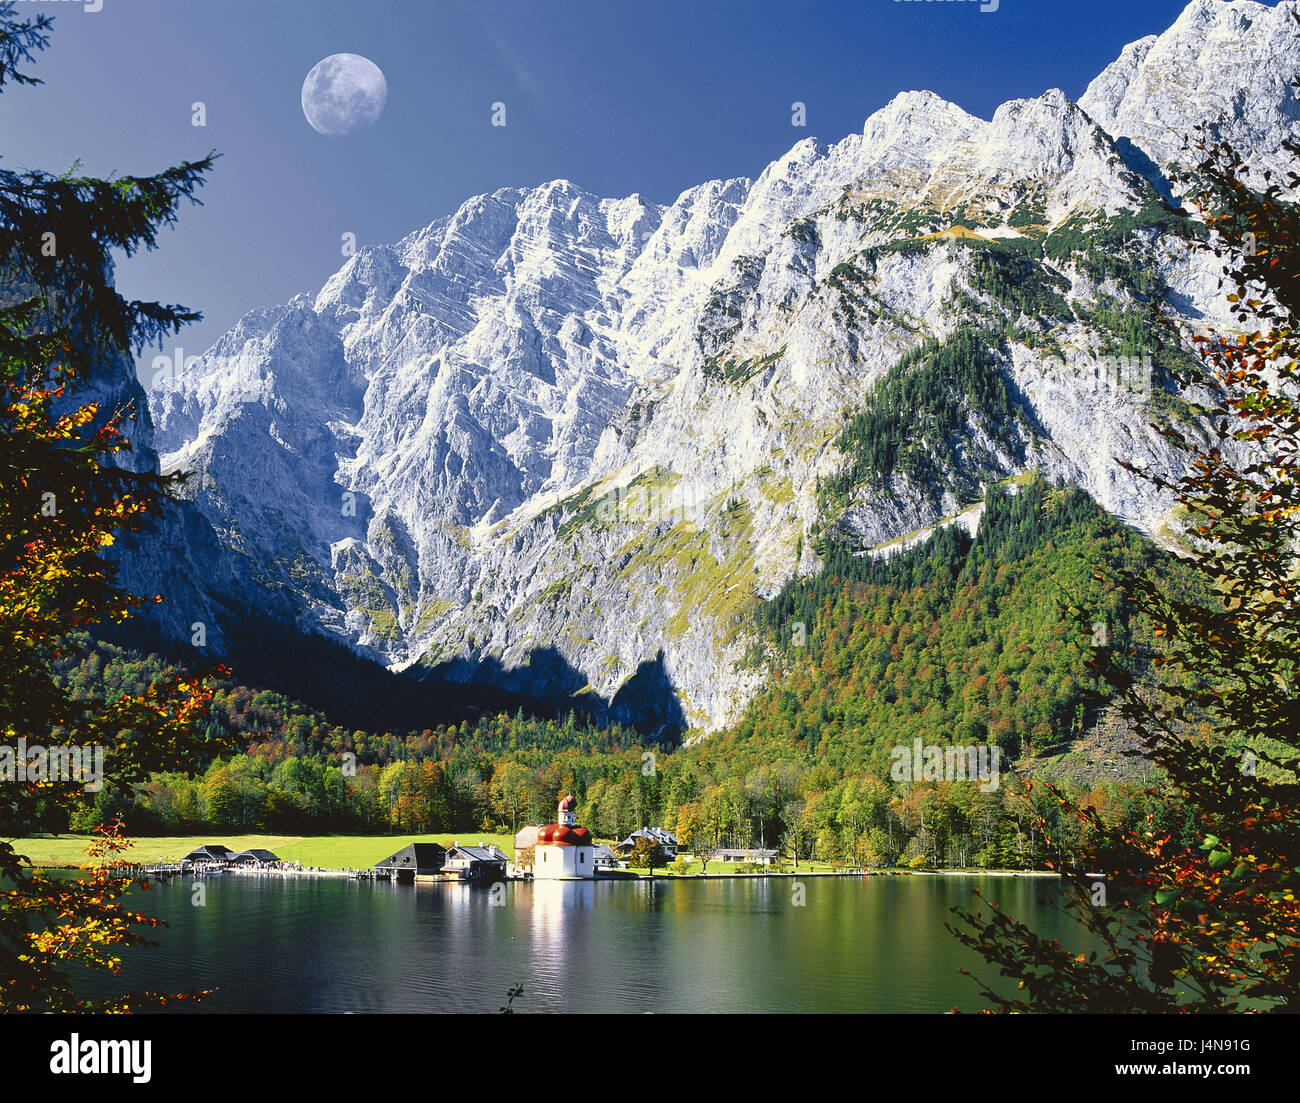 Germany, Bavaria, St. Bartholomä, the Königssee, mountains, Watzmann, moon, [M], South Germany, Upper Bavaria, lake, water, rest, silence, deserted, church, sacred construction, faith, religion, Christianity, architecture, mountains, place of interest, [M] Stock Photo